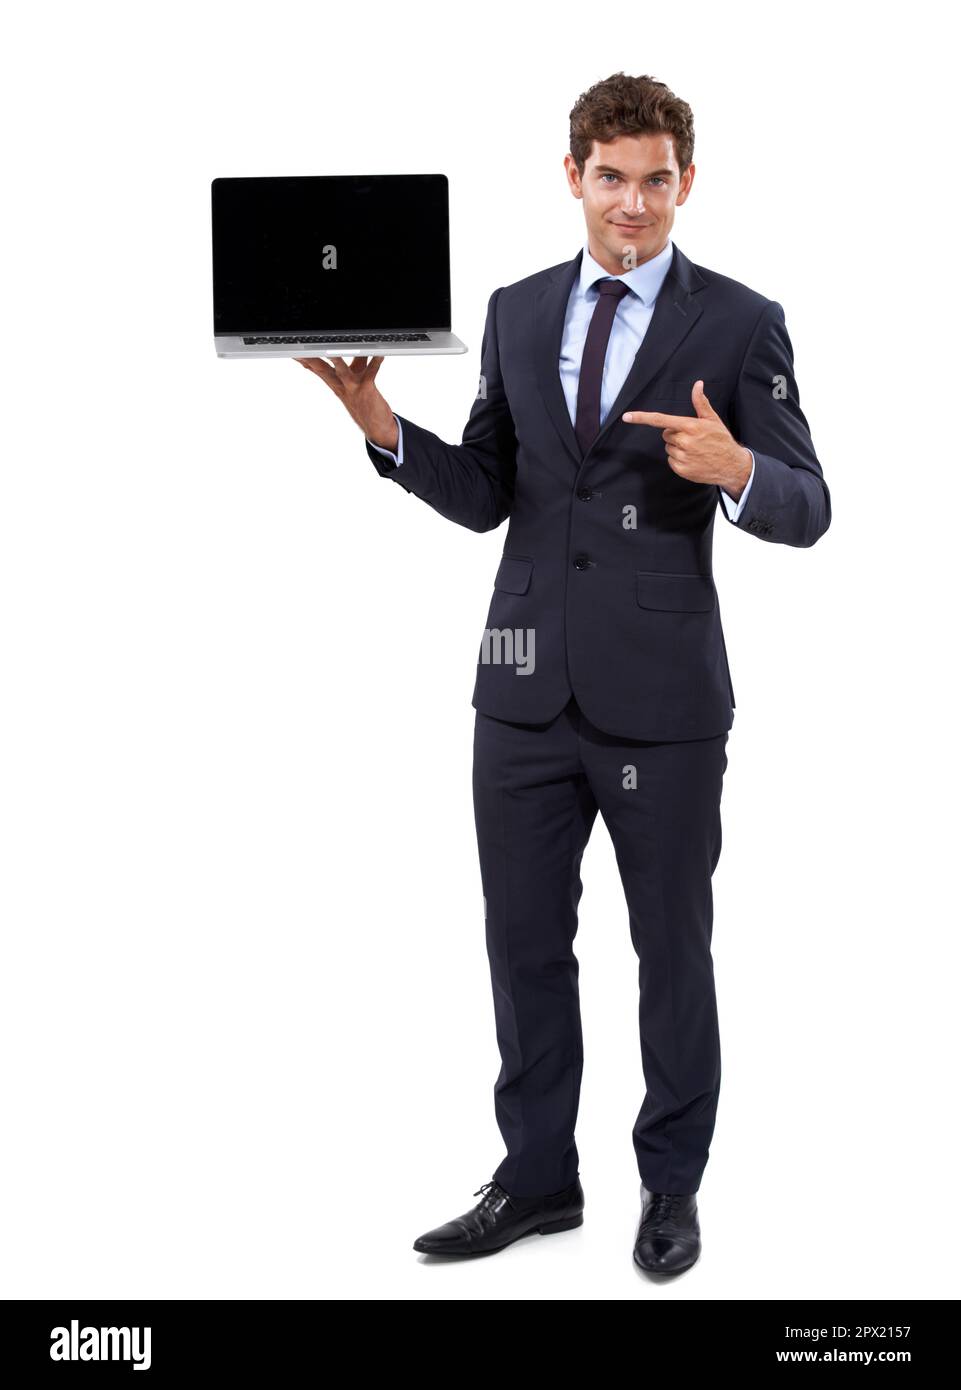 Put your advertisement on my screen. A handsome young businessman displaying a laptop against white background. Stock Photo